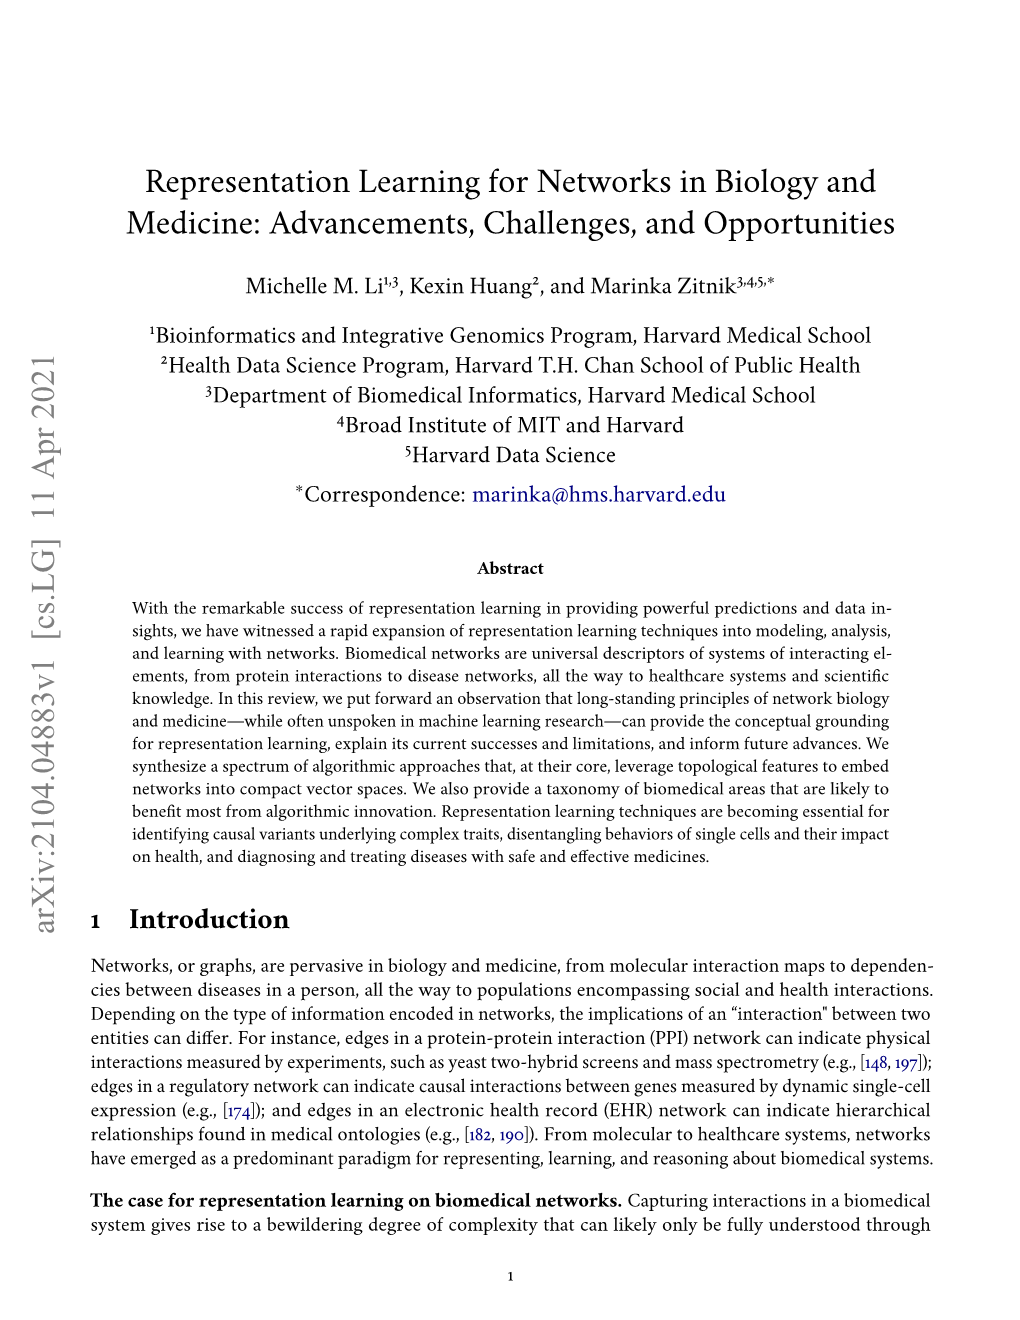 Representation Learning for Networks in Biology and Medicine: Advancements, Challenges, and Opportunities Arxiv:2104.04883V1 [C